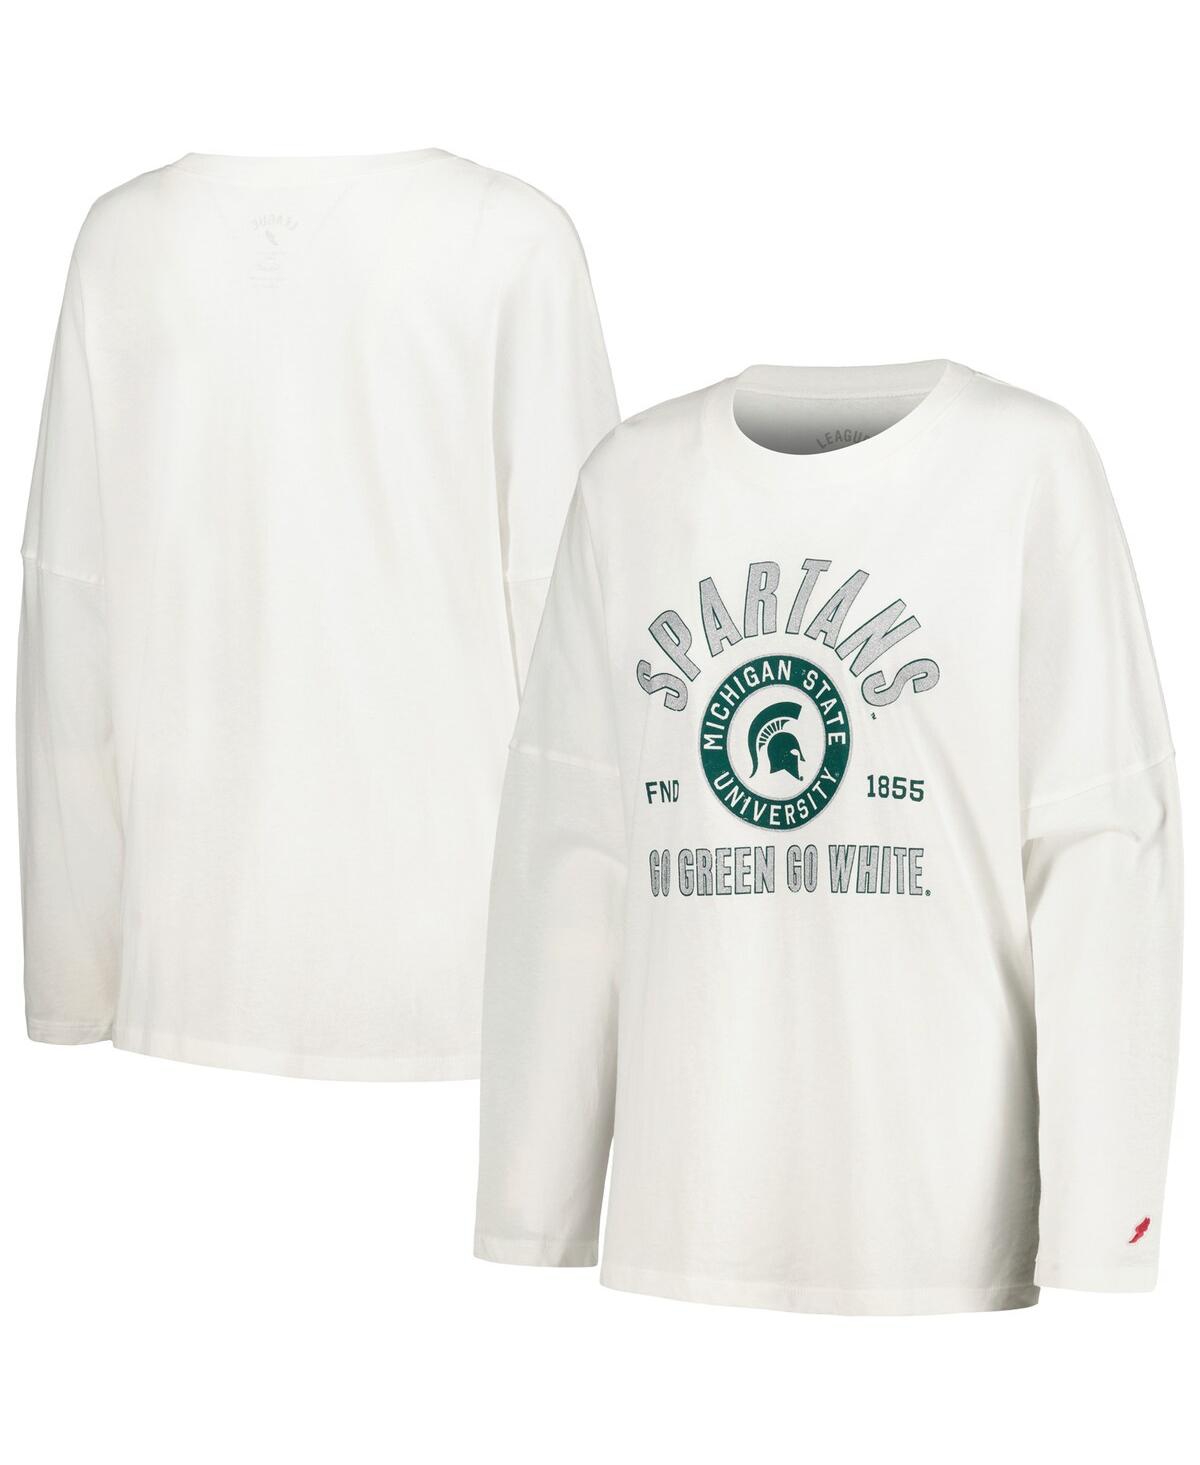 Women's League Collegiate Wear White Distressed Michigan State Spartans Clothesline Oversized Long Sleeve T-shirt - White